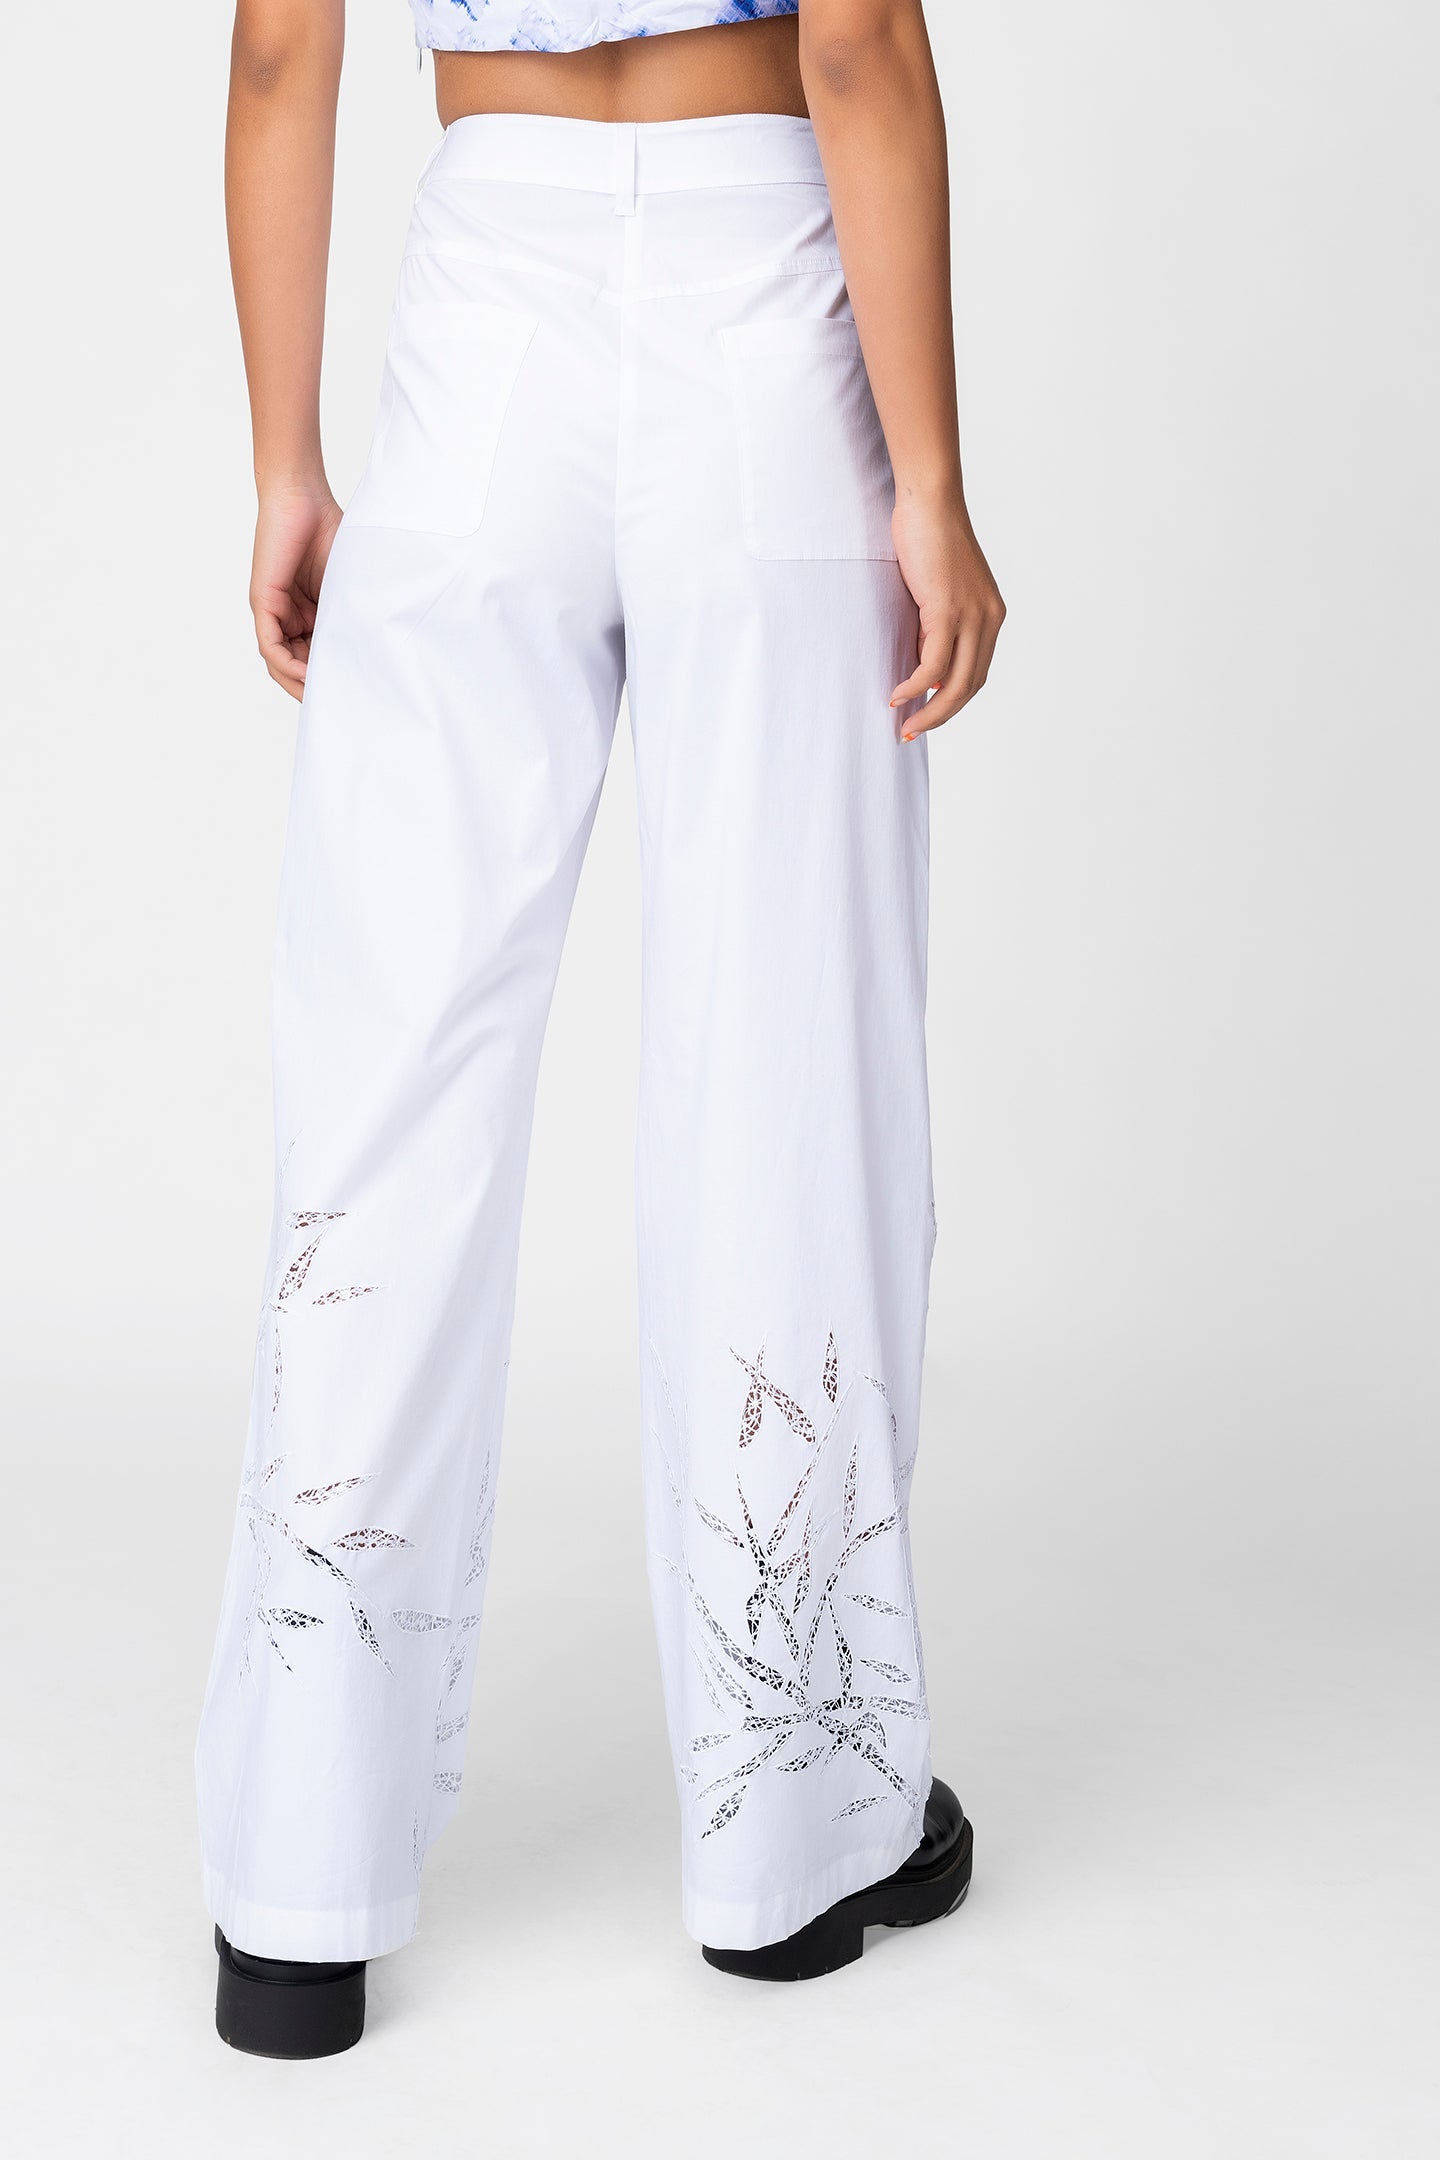 Buy online Cutwork Embroidered Pants at best price in india   Geneslecoanethemant  Genes online store 2020